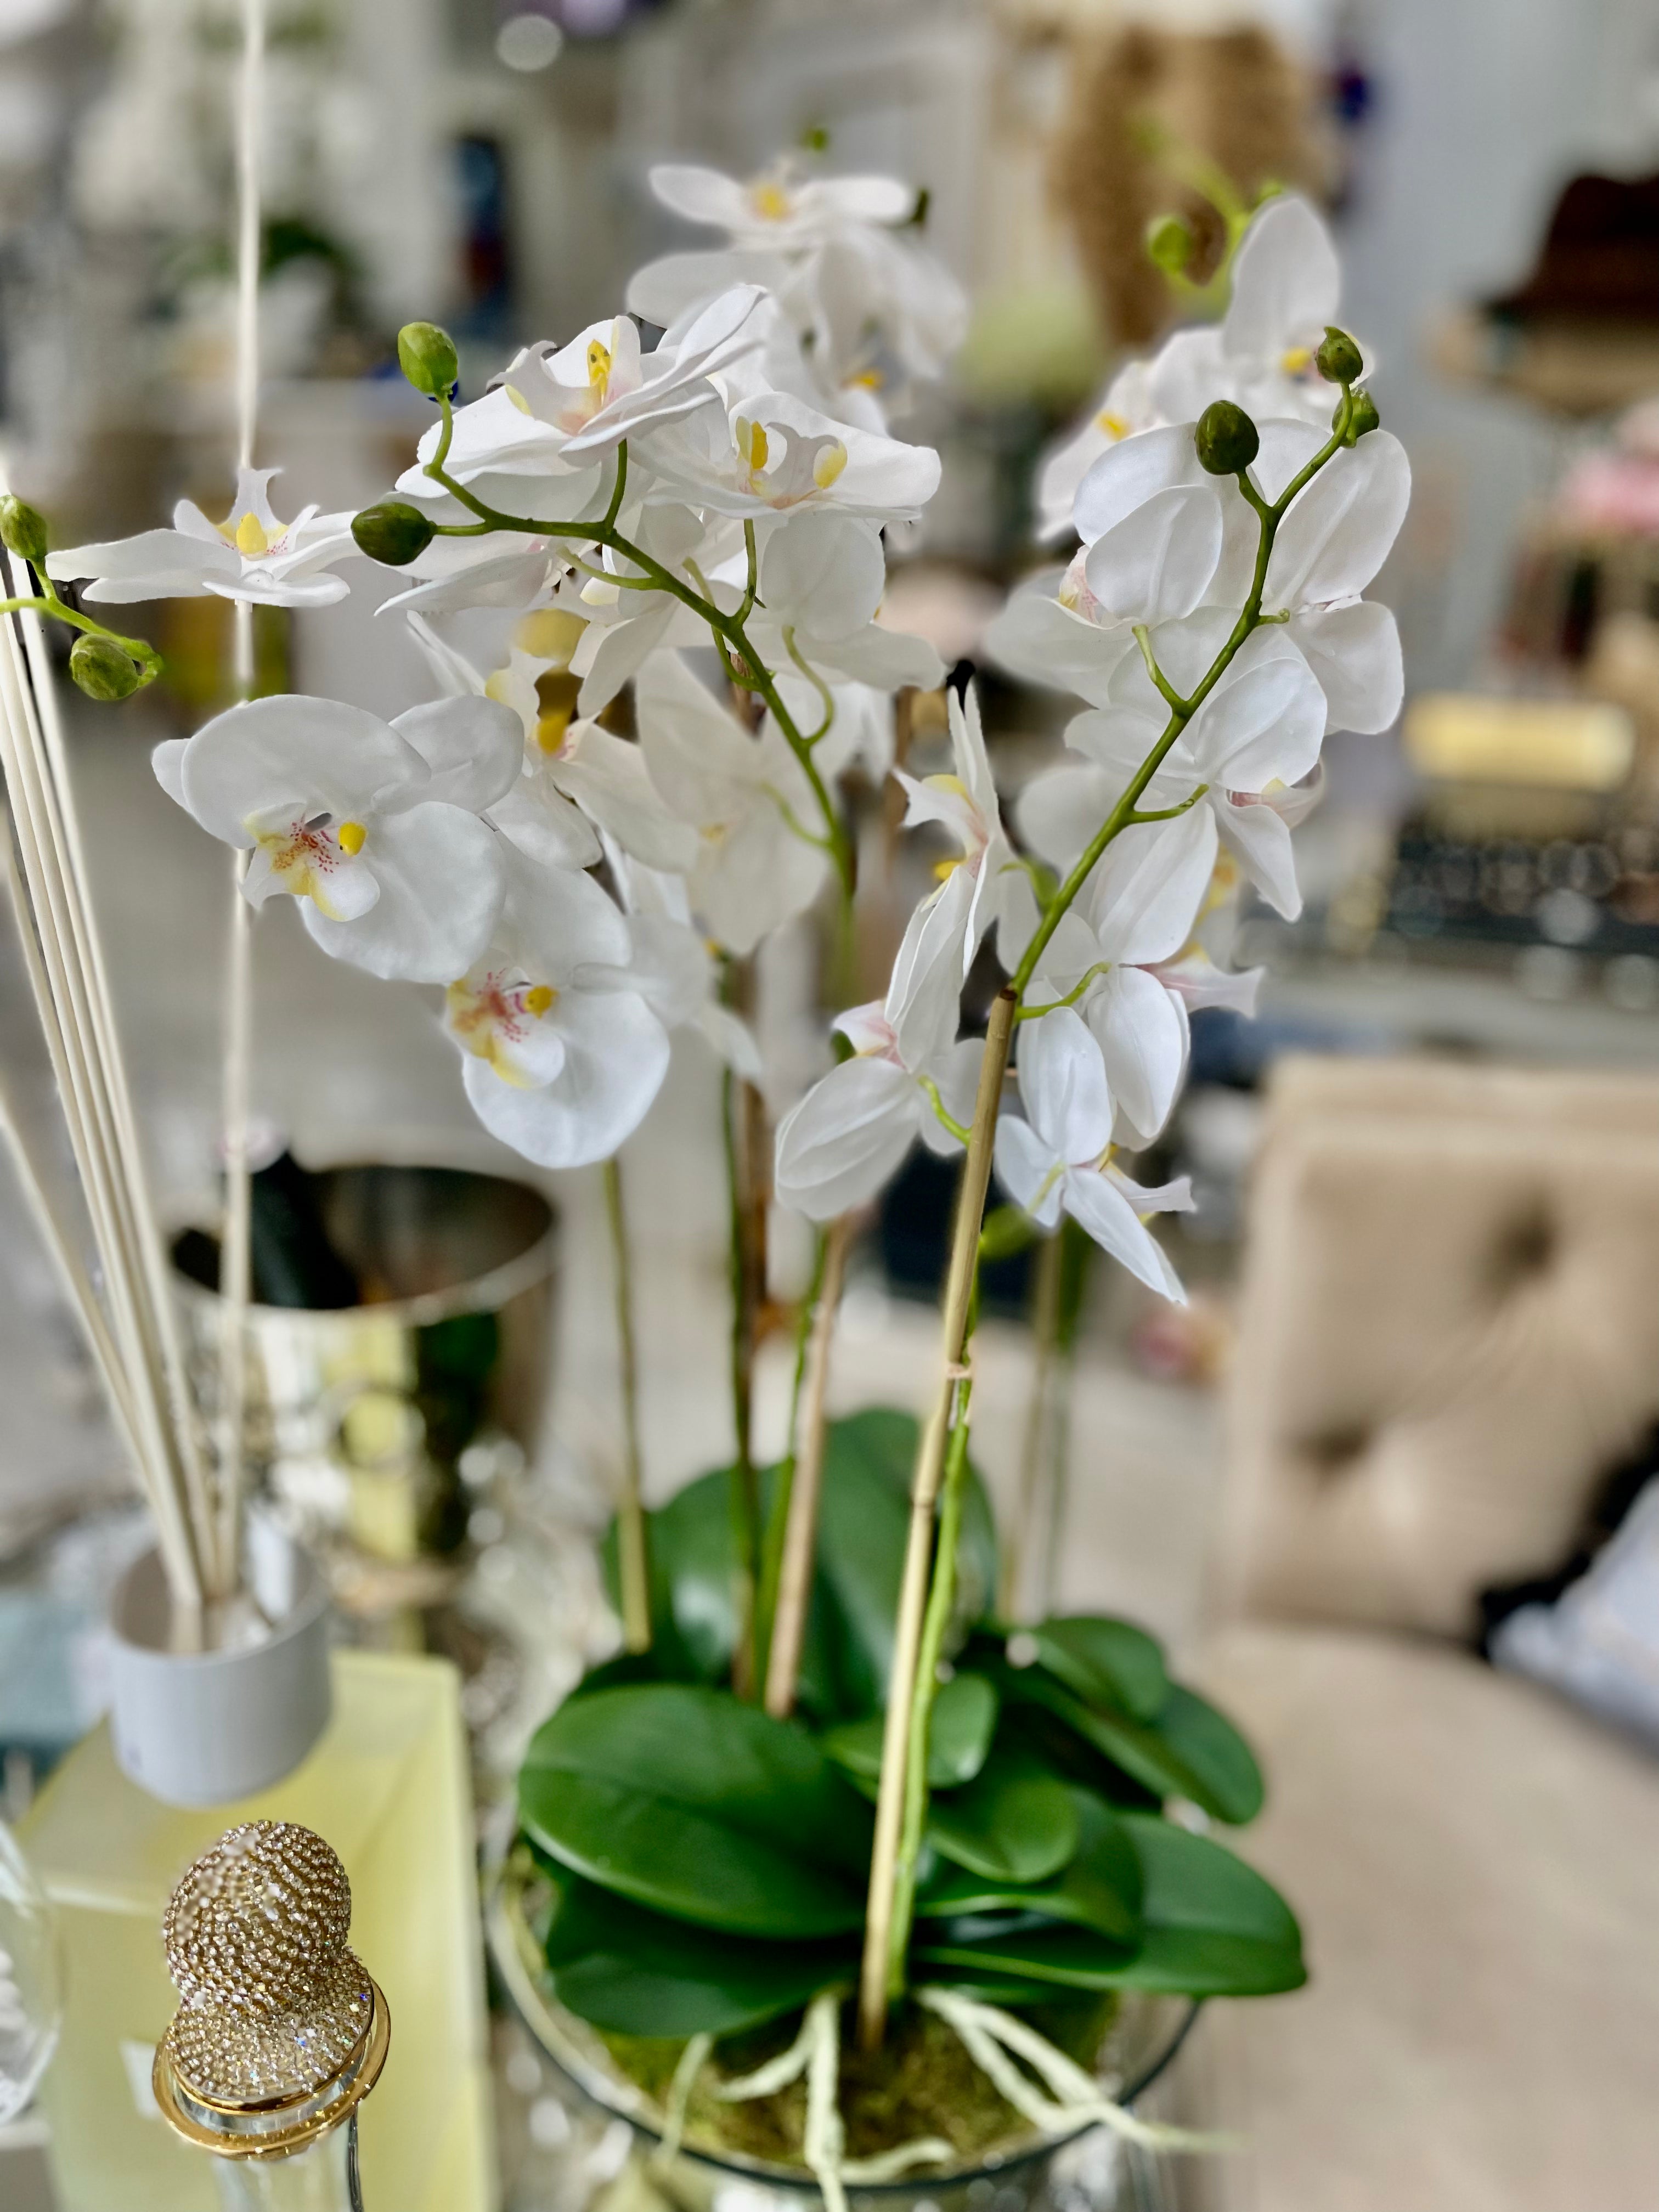 White Orchid Phalaenopsis Plants with Moss in Shallow Glass Bowl